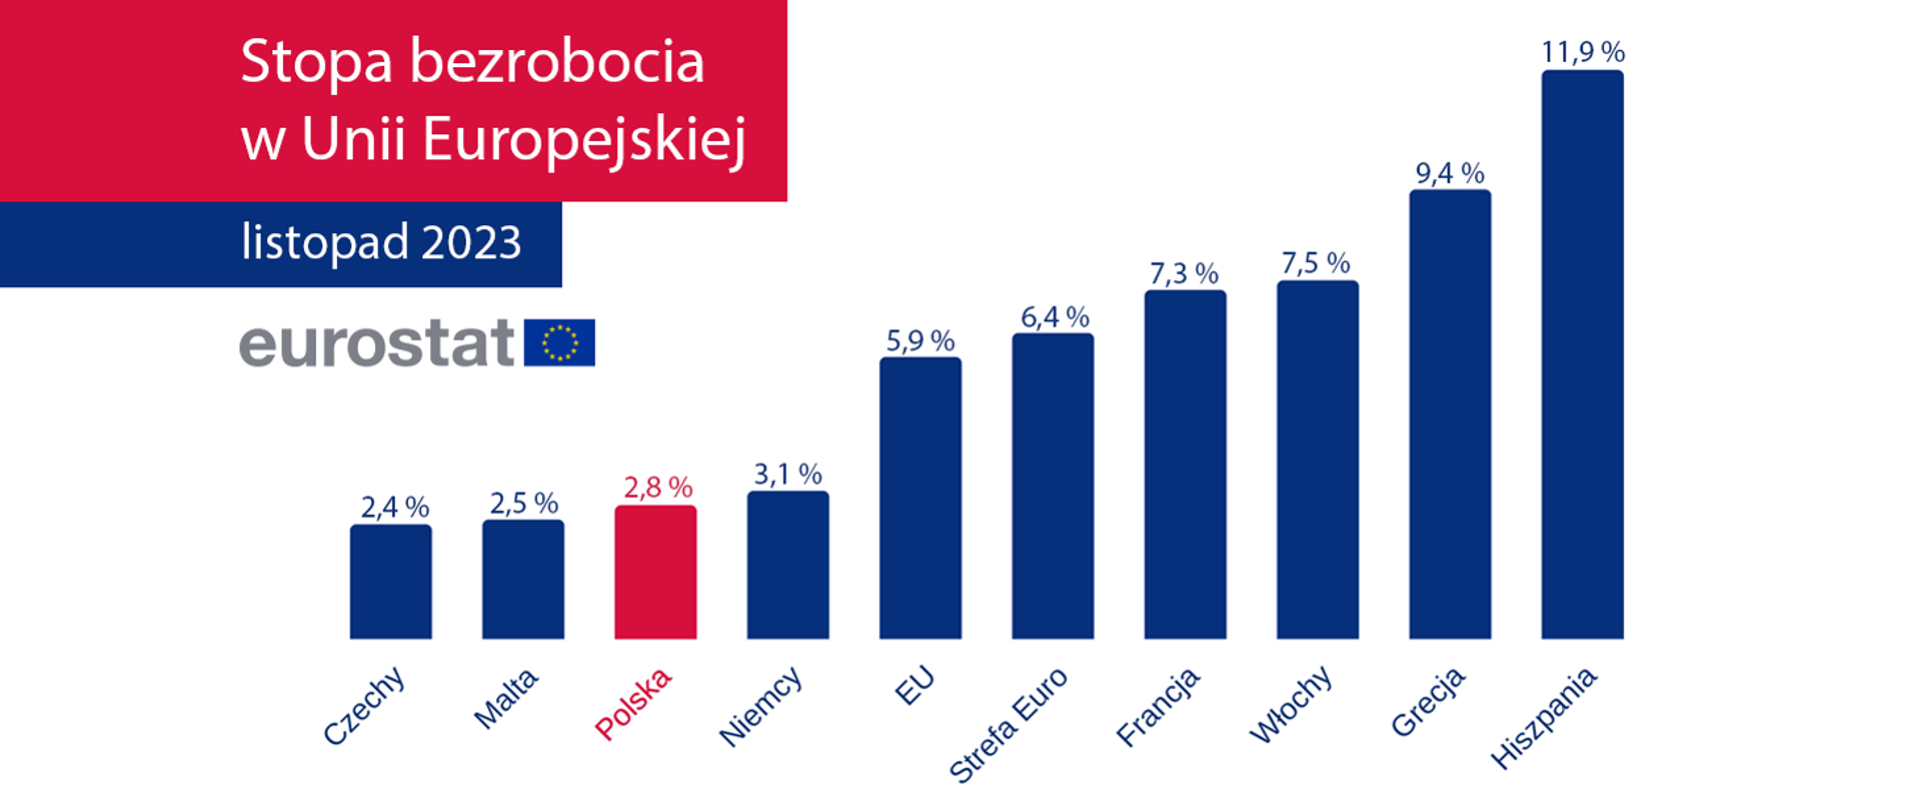 Eurostat: the unemployment rate in Poland is one of the lowest in Europe